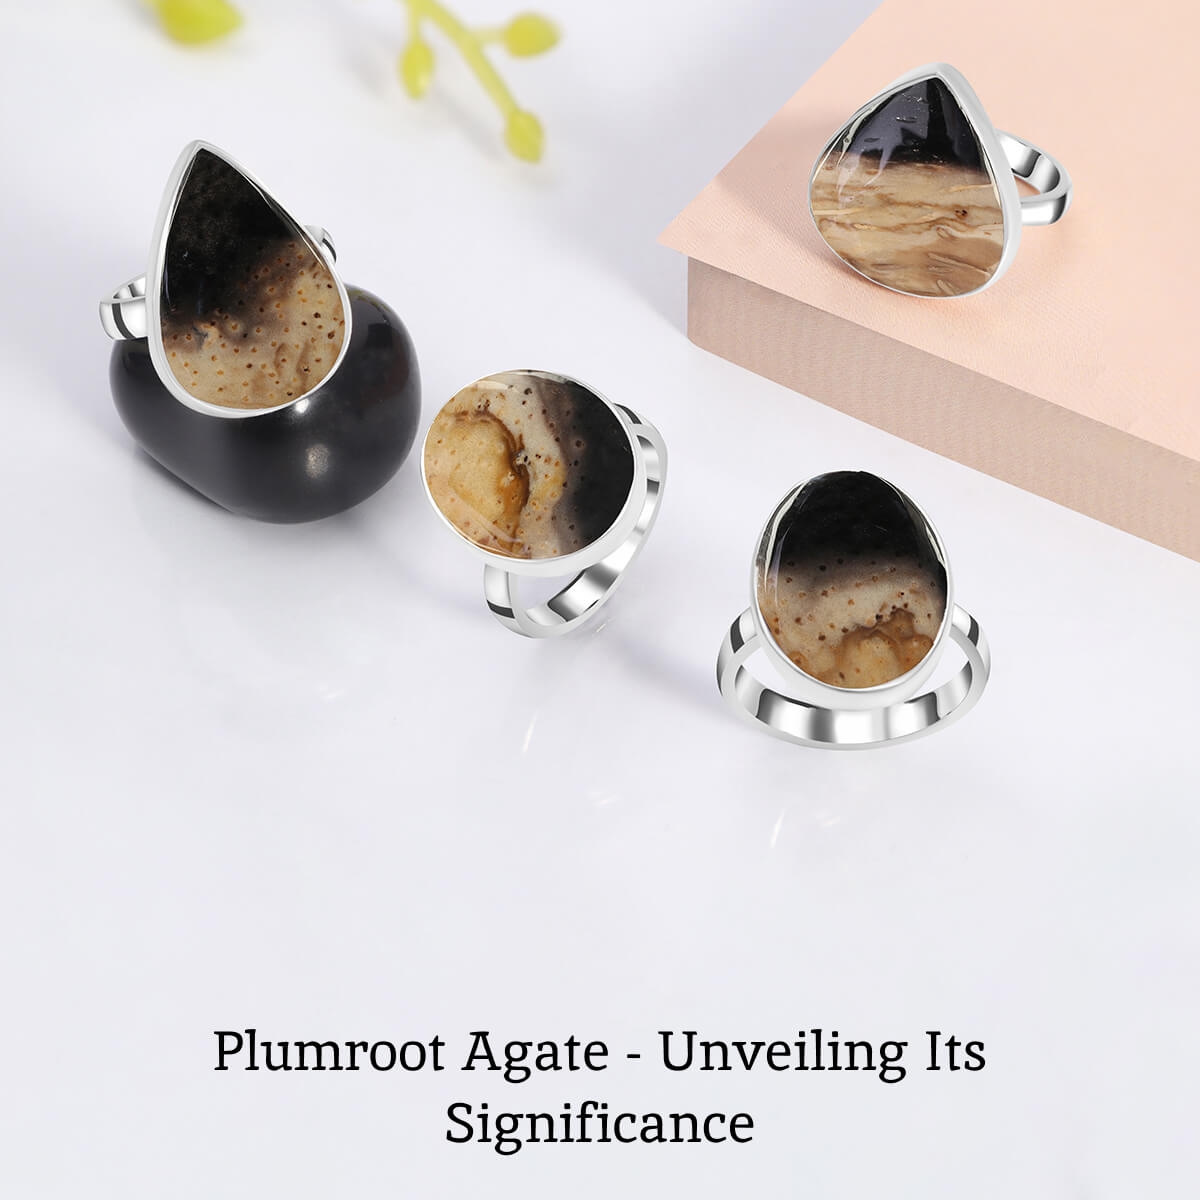 What Is The Value Of The Plumroot Agate Stone?